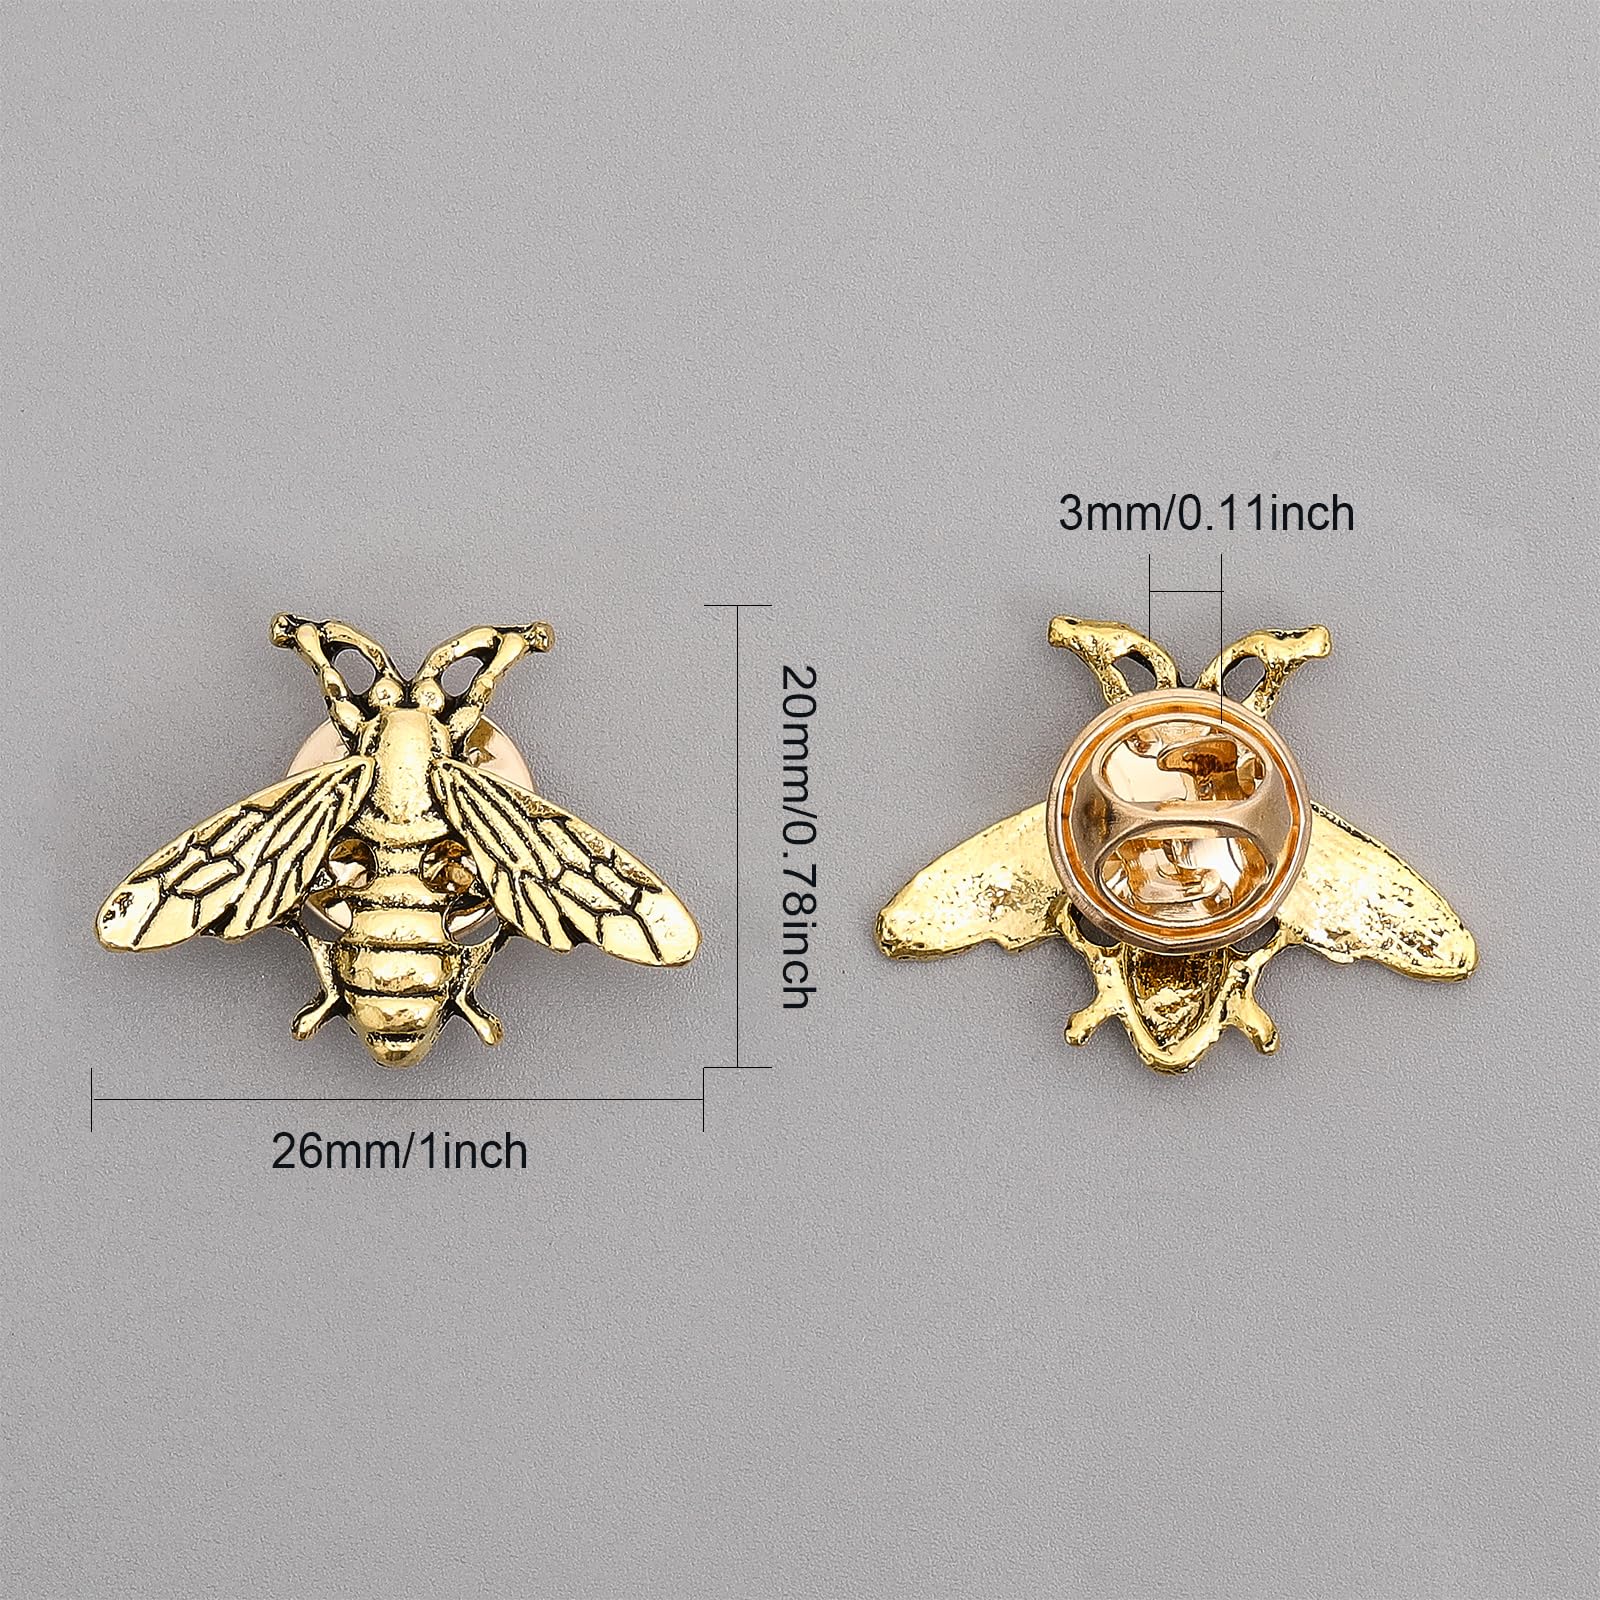 CHGCRAFT 12Pcs Bees Alloy Lapel Pins for Backpack Clothes Decorations Party Anniversary Accessories Gifts, Golden 26x20x3mm